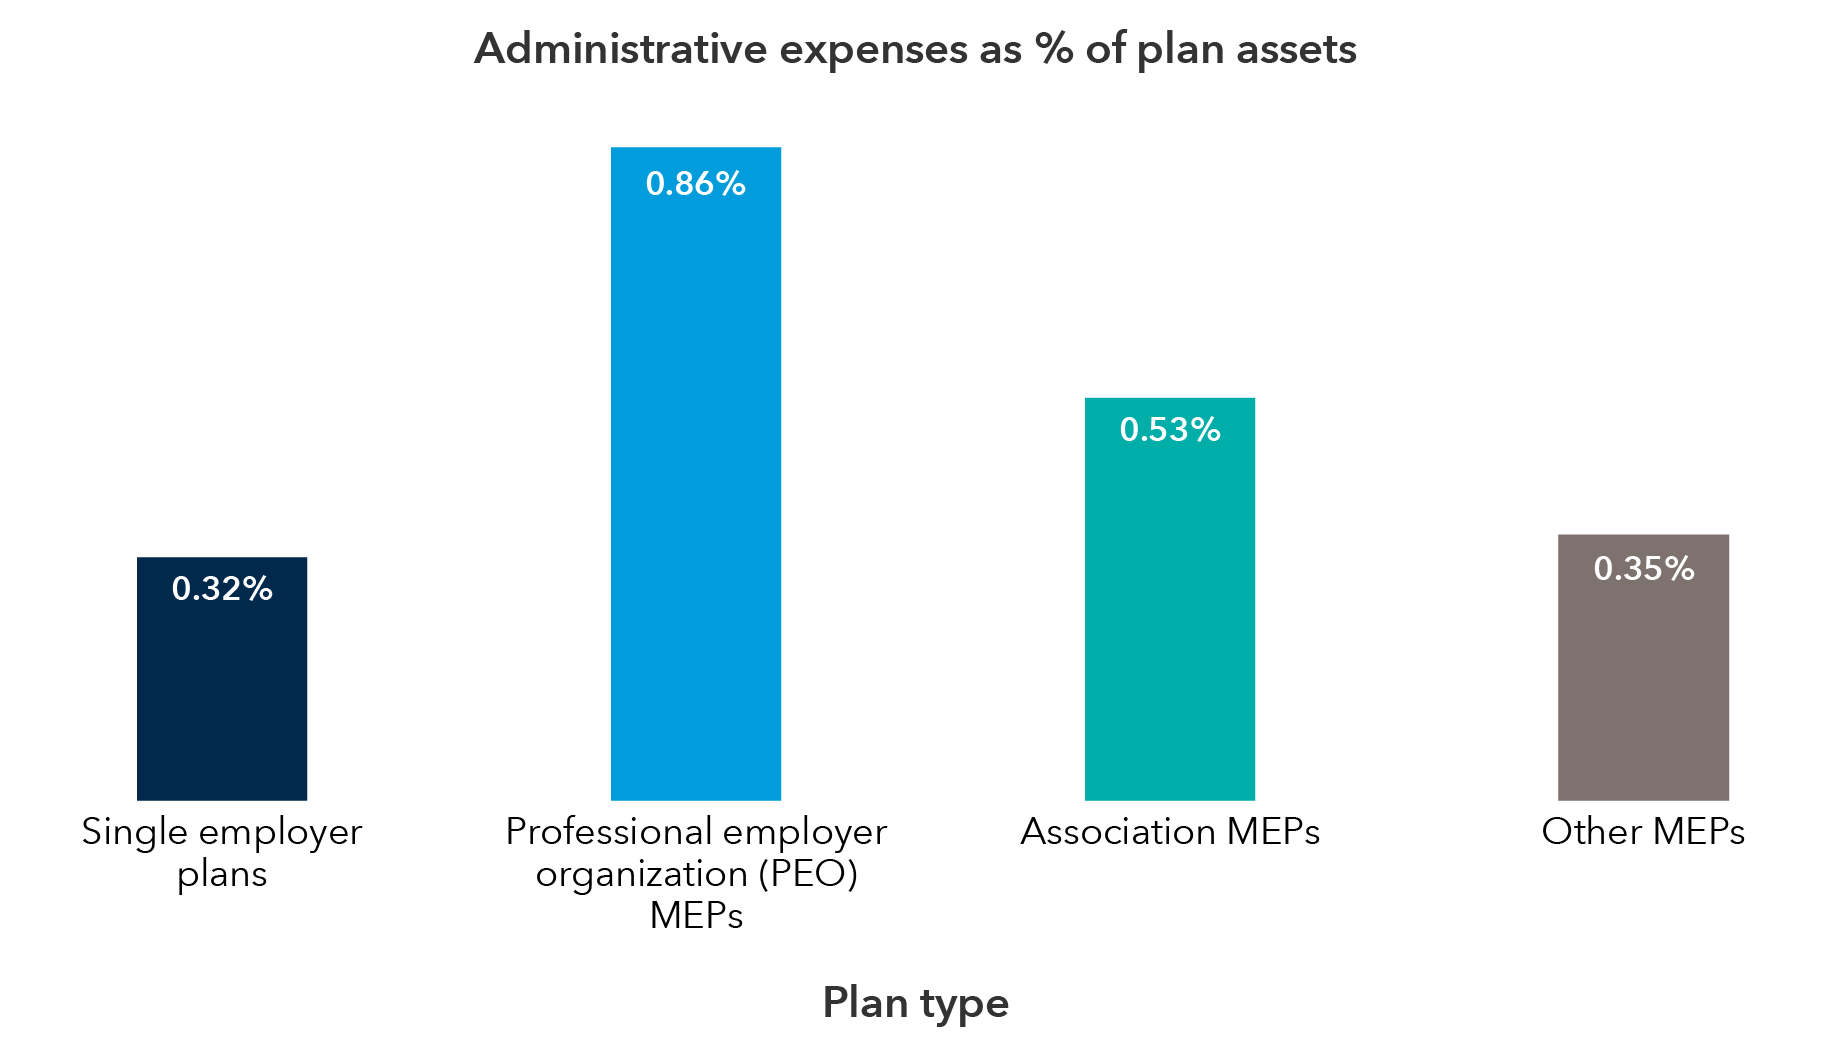 This bar chart shows the average cost of a 401(k) plan by type as a percentage of assets. Expenses for each type are as follows: 0.32% for Single employer plans, 0.86% for Professional employer organization (PEO) MEPs, 0.53% for Association MEPS and 0.35% for Other MEPs.